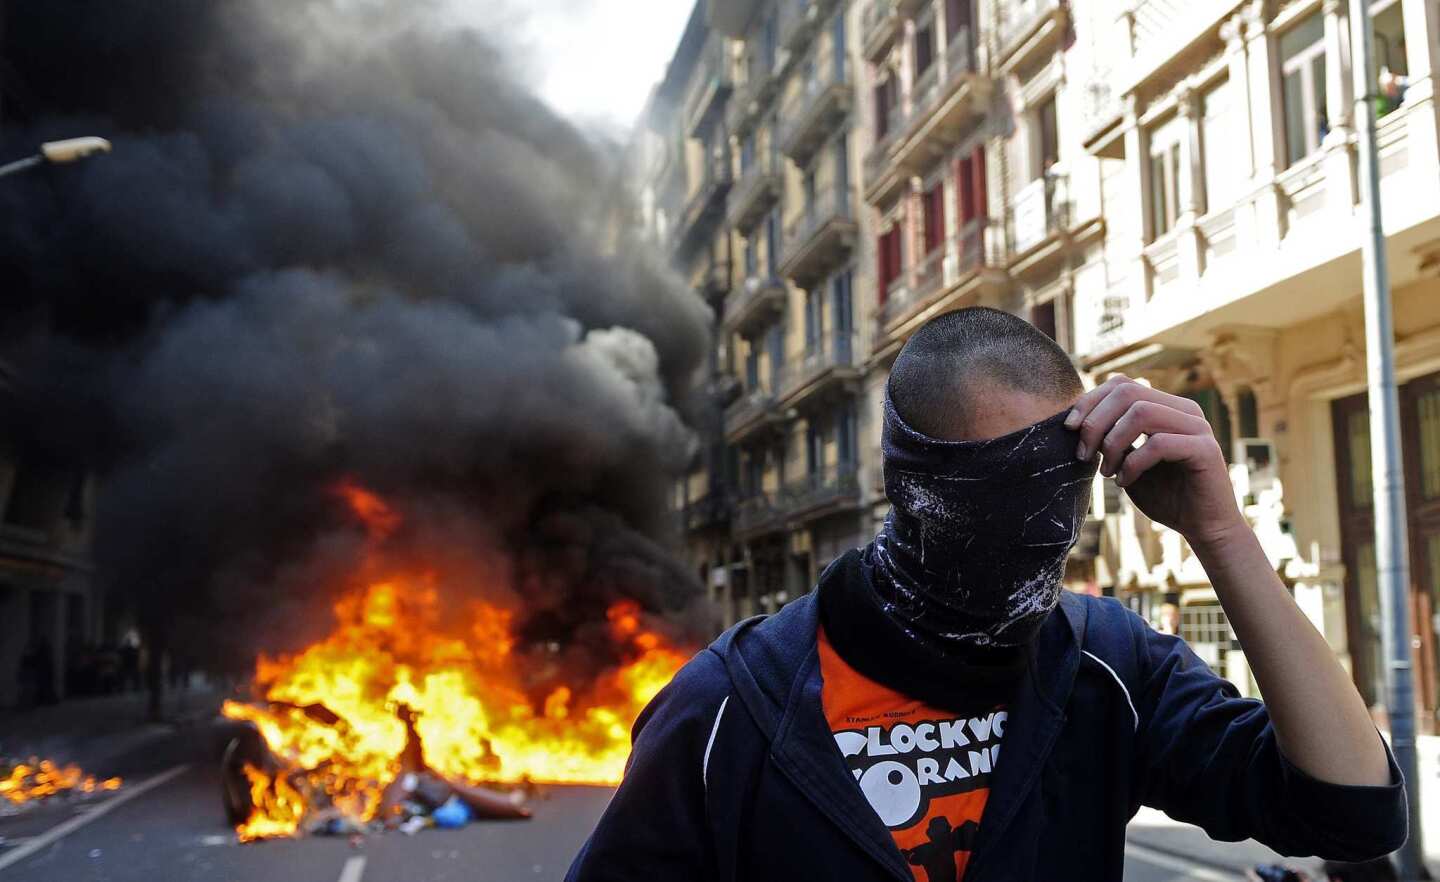 A demonstrator covers his face during the general strike in Barcelona. Spanish unions angry over economic reforms are waging a general strike, challenging a conservative government not yet 100 days old and joining other troubled European workers in venting their frustration on the street.